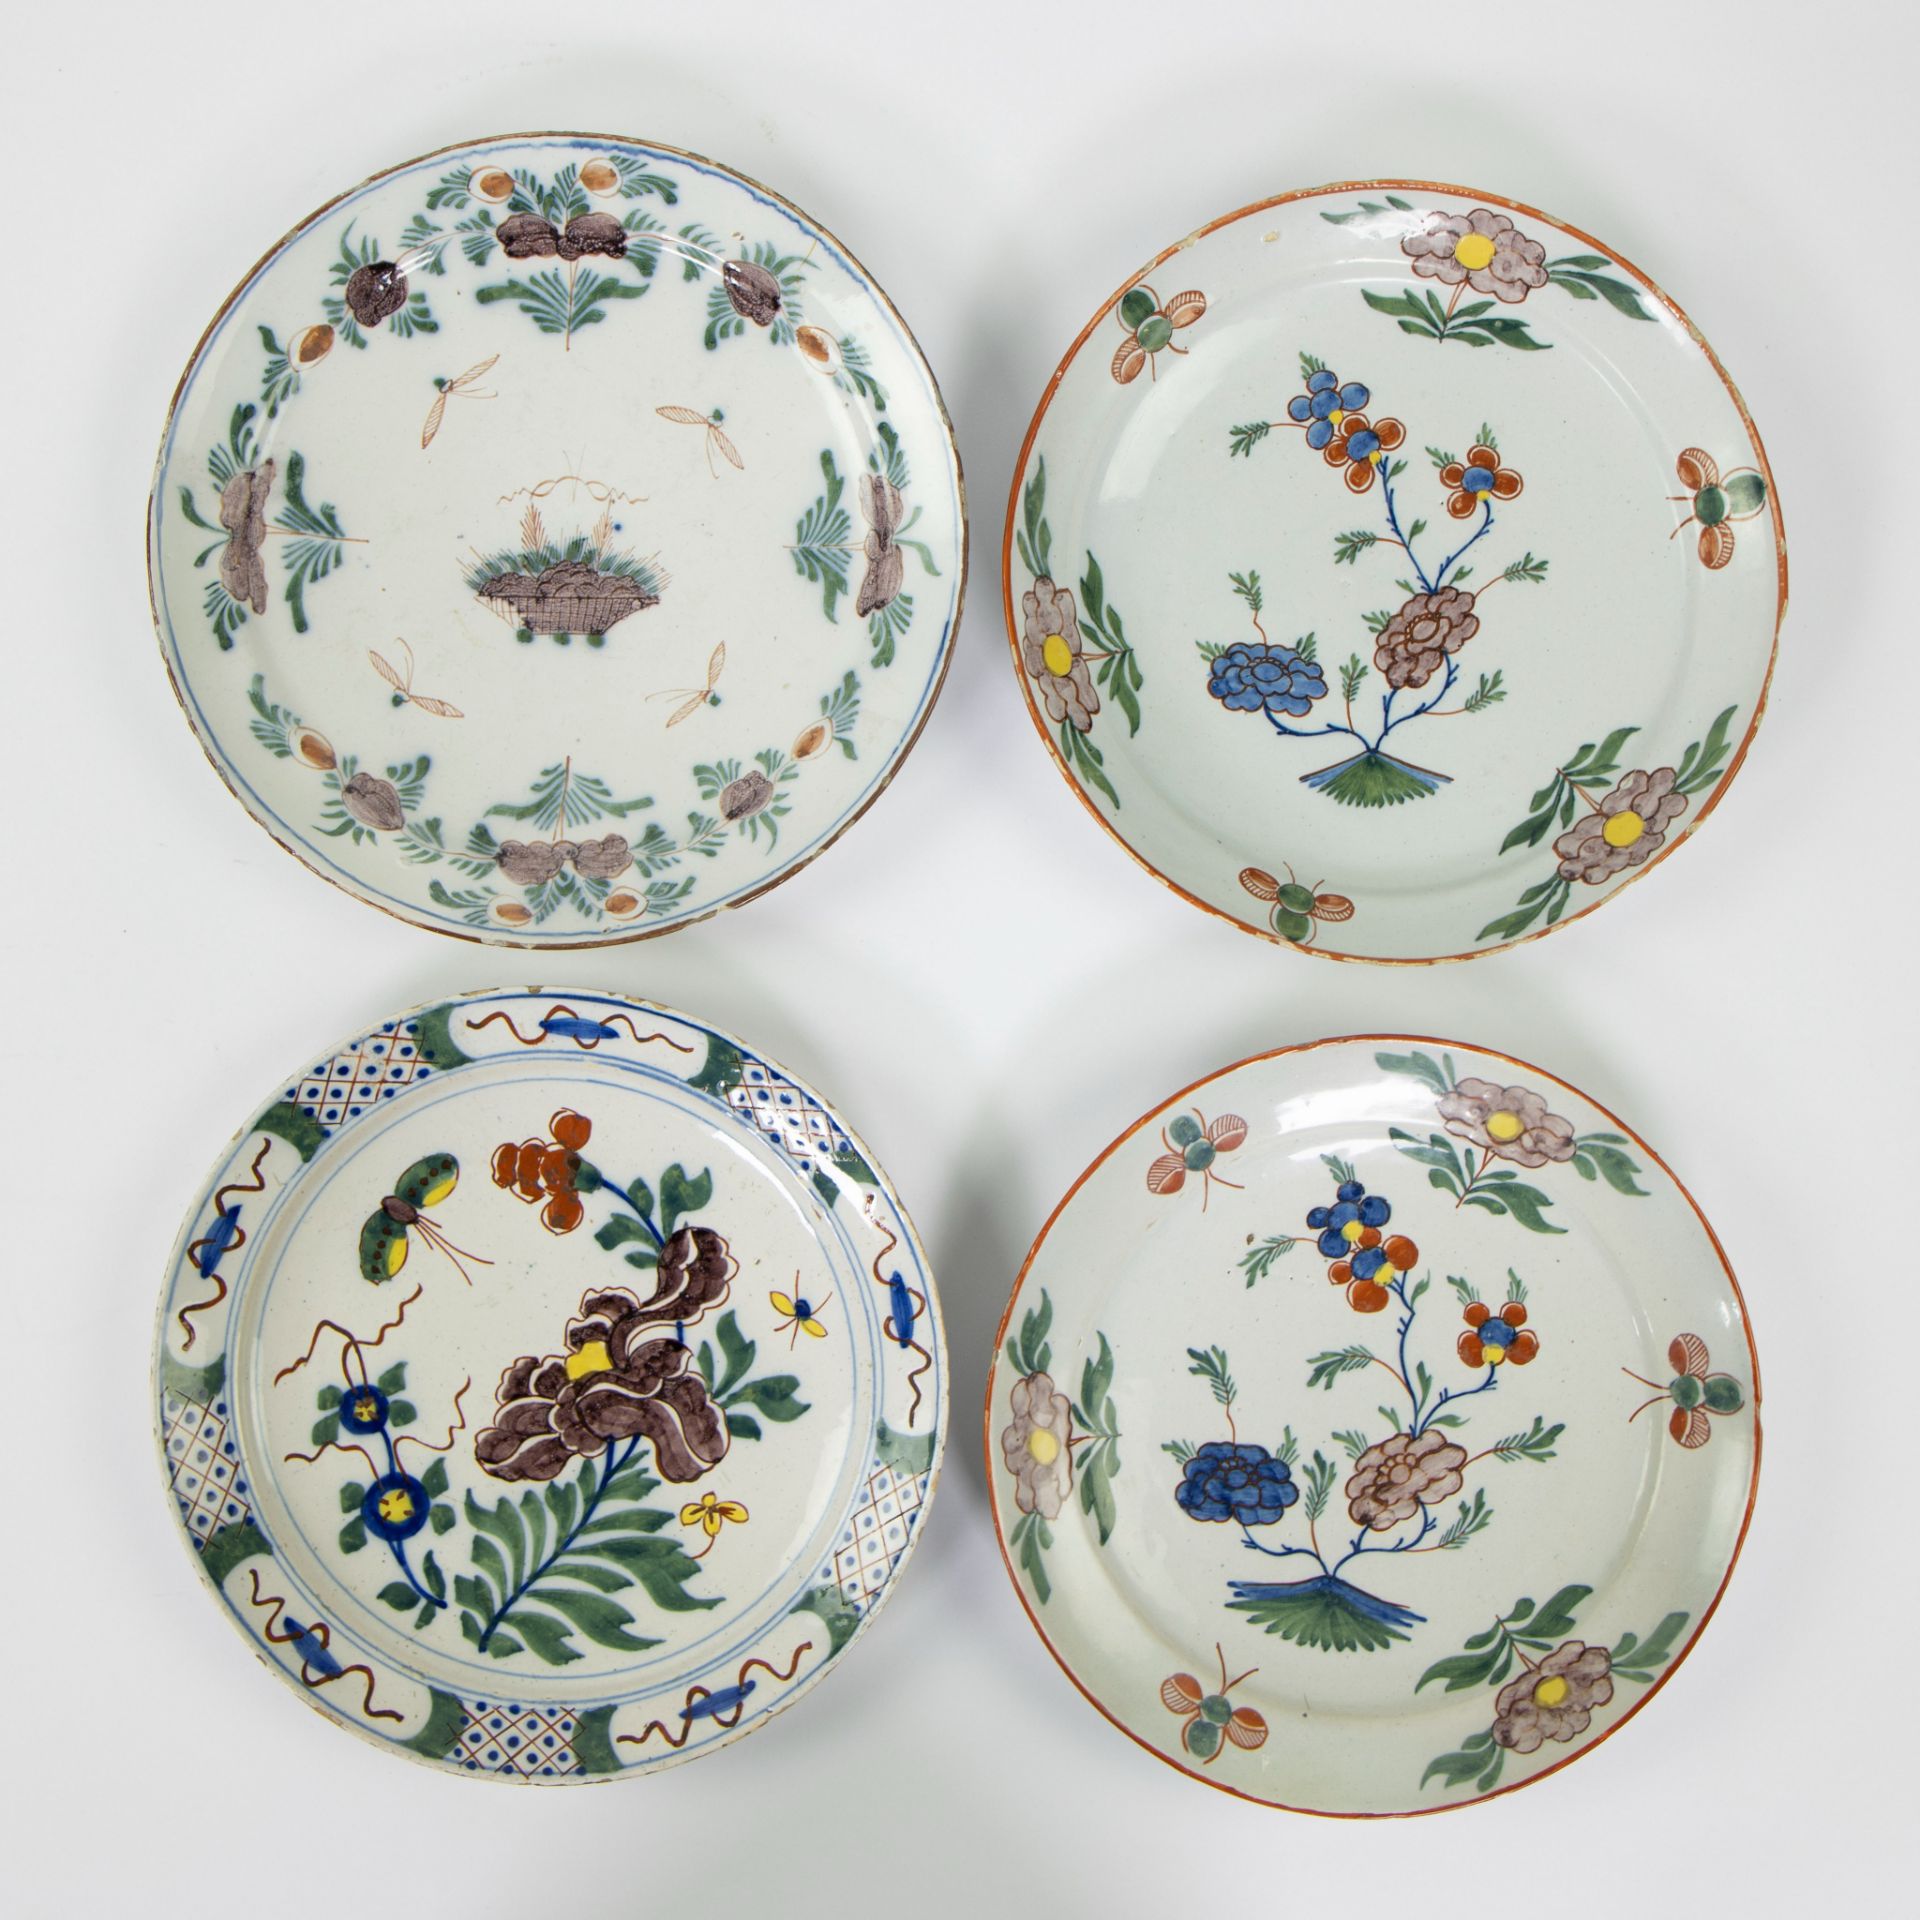 Collection of polychrome Delft plates, 18th century - Image 2 of 7